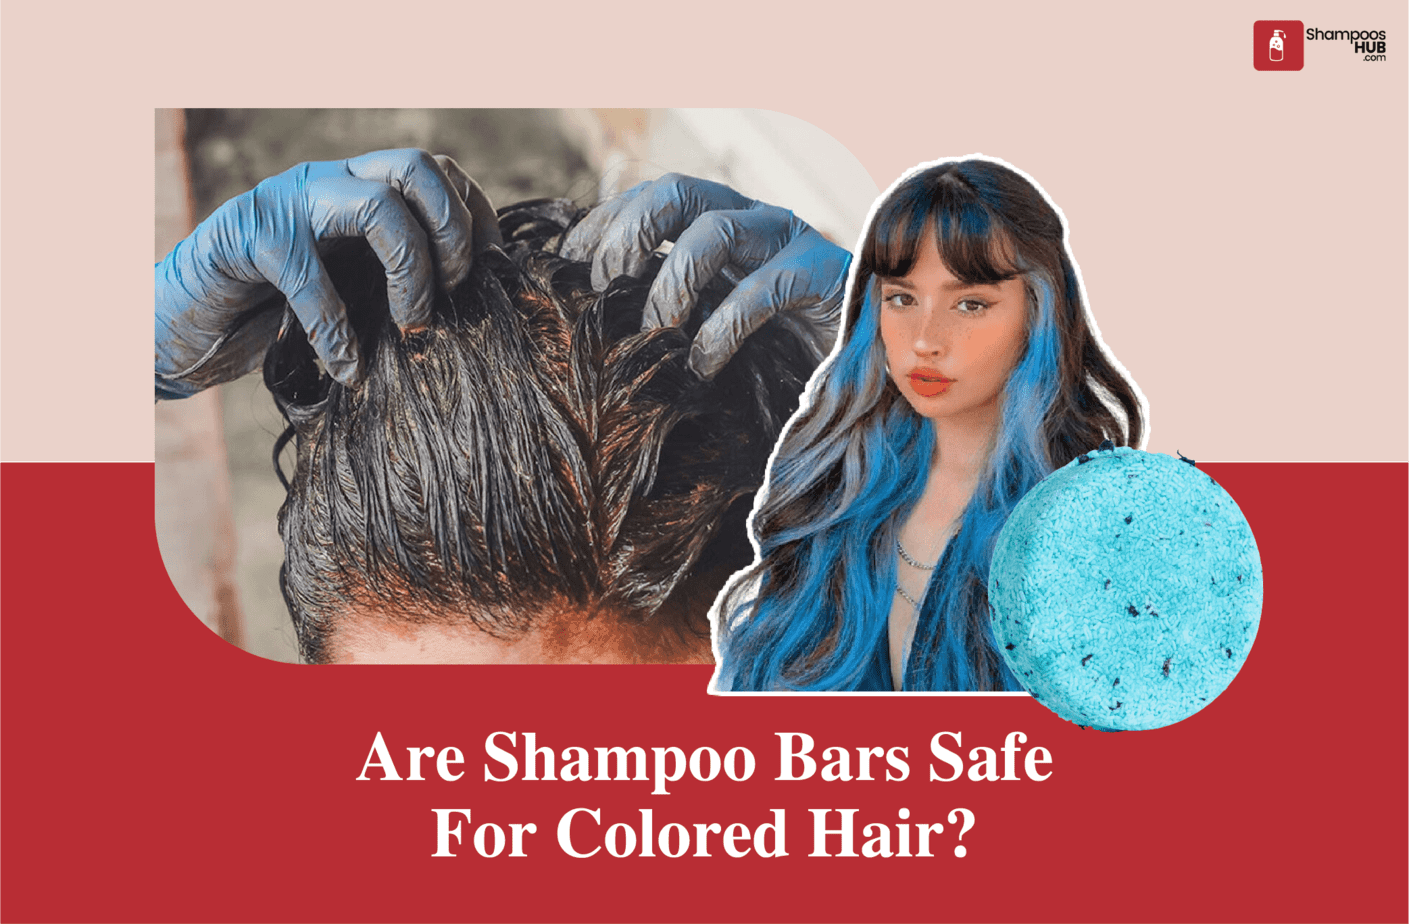 Are Shampoo Bars Safe For Colored Hair?